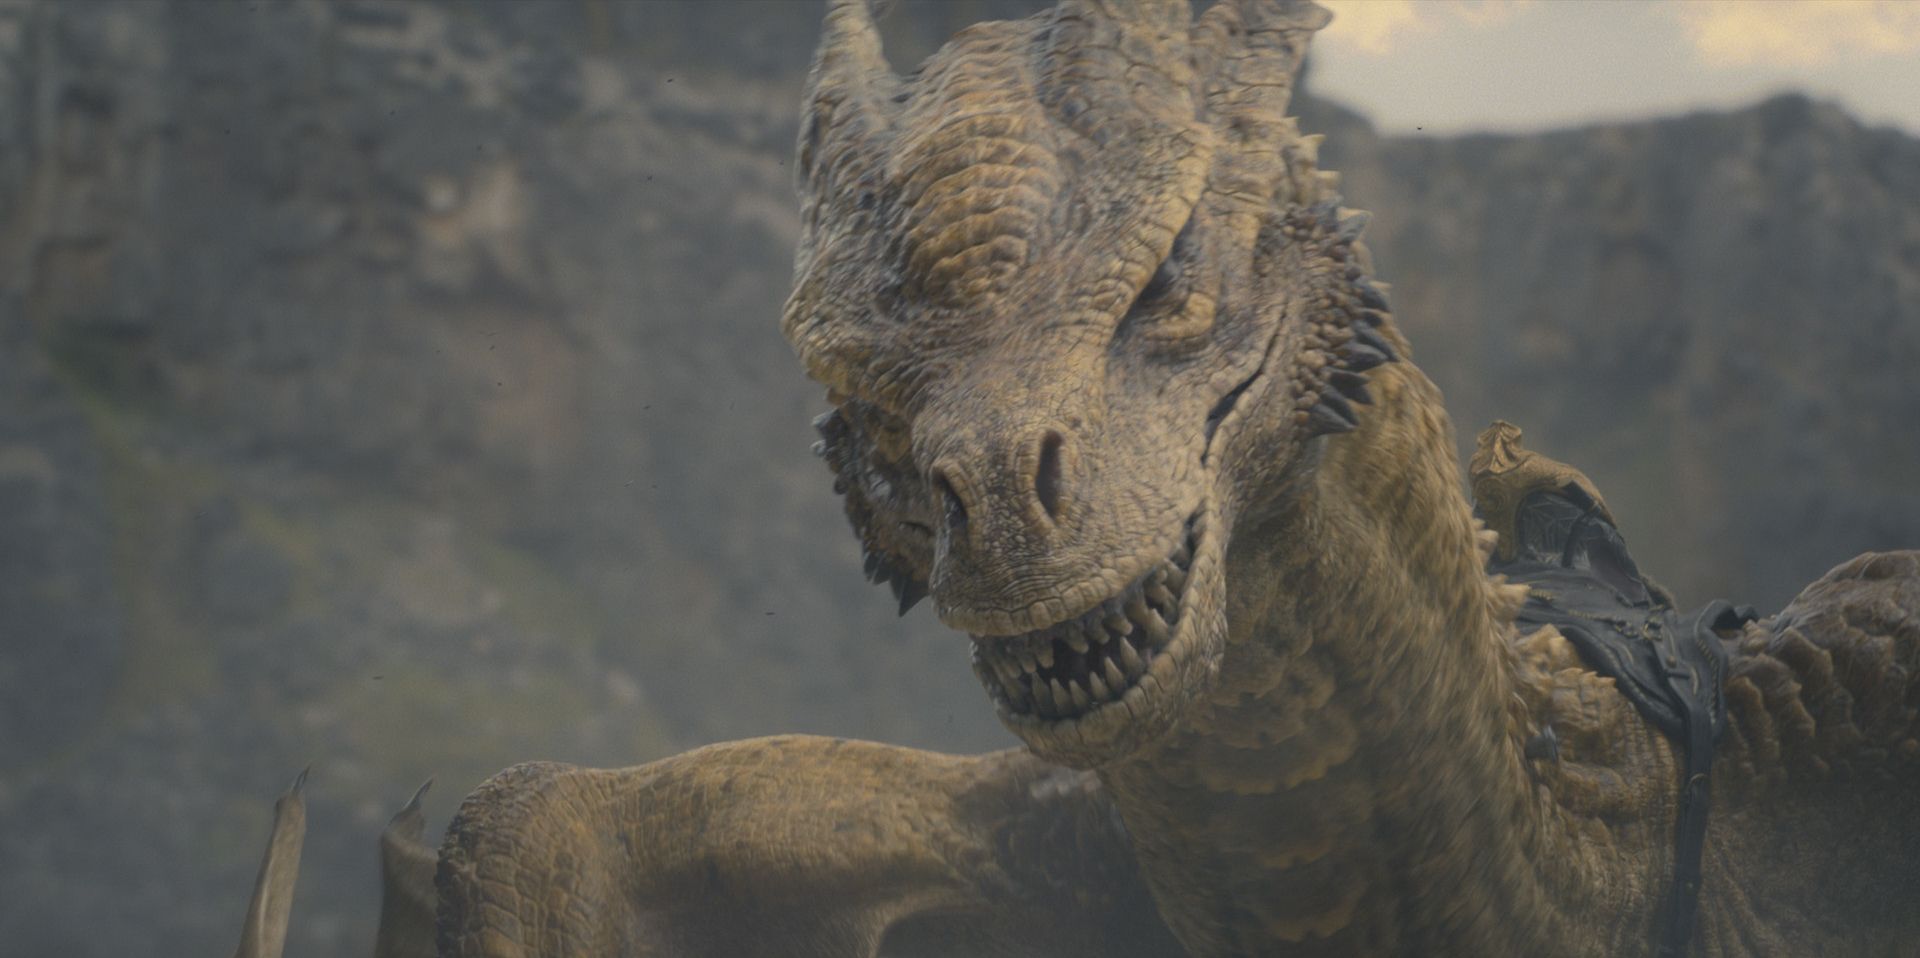 House Of The Dragon Season 2 Gets Shorter Episode Run, But Season 3 Is  Likely, TV Series